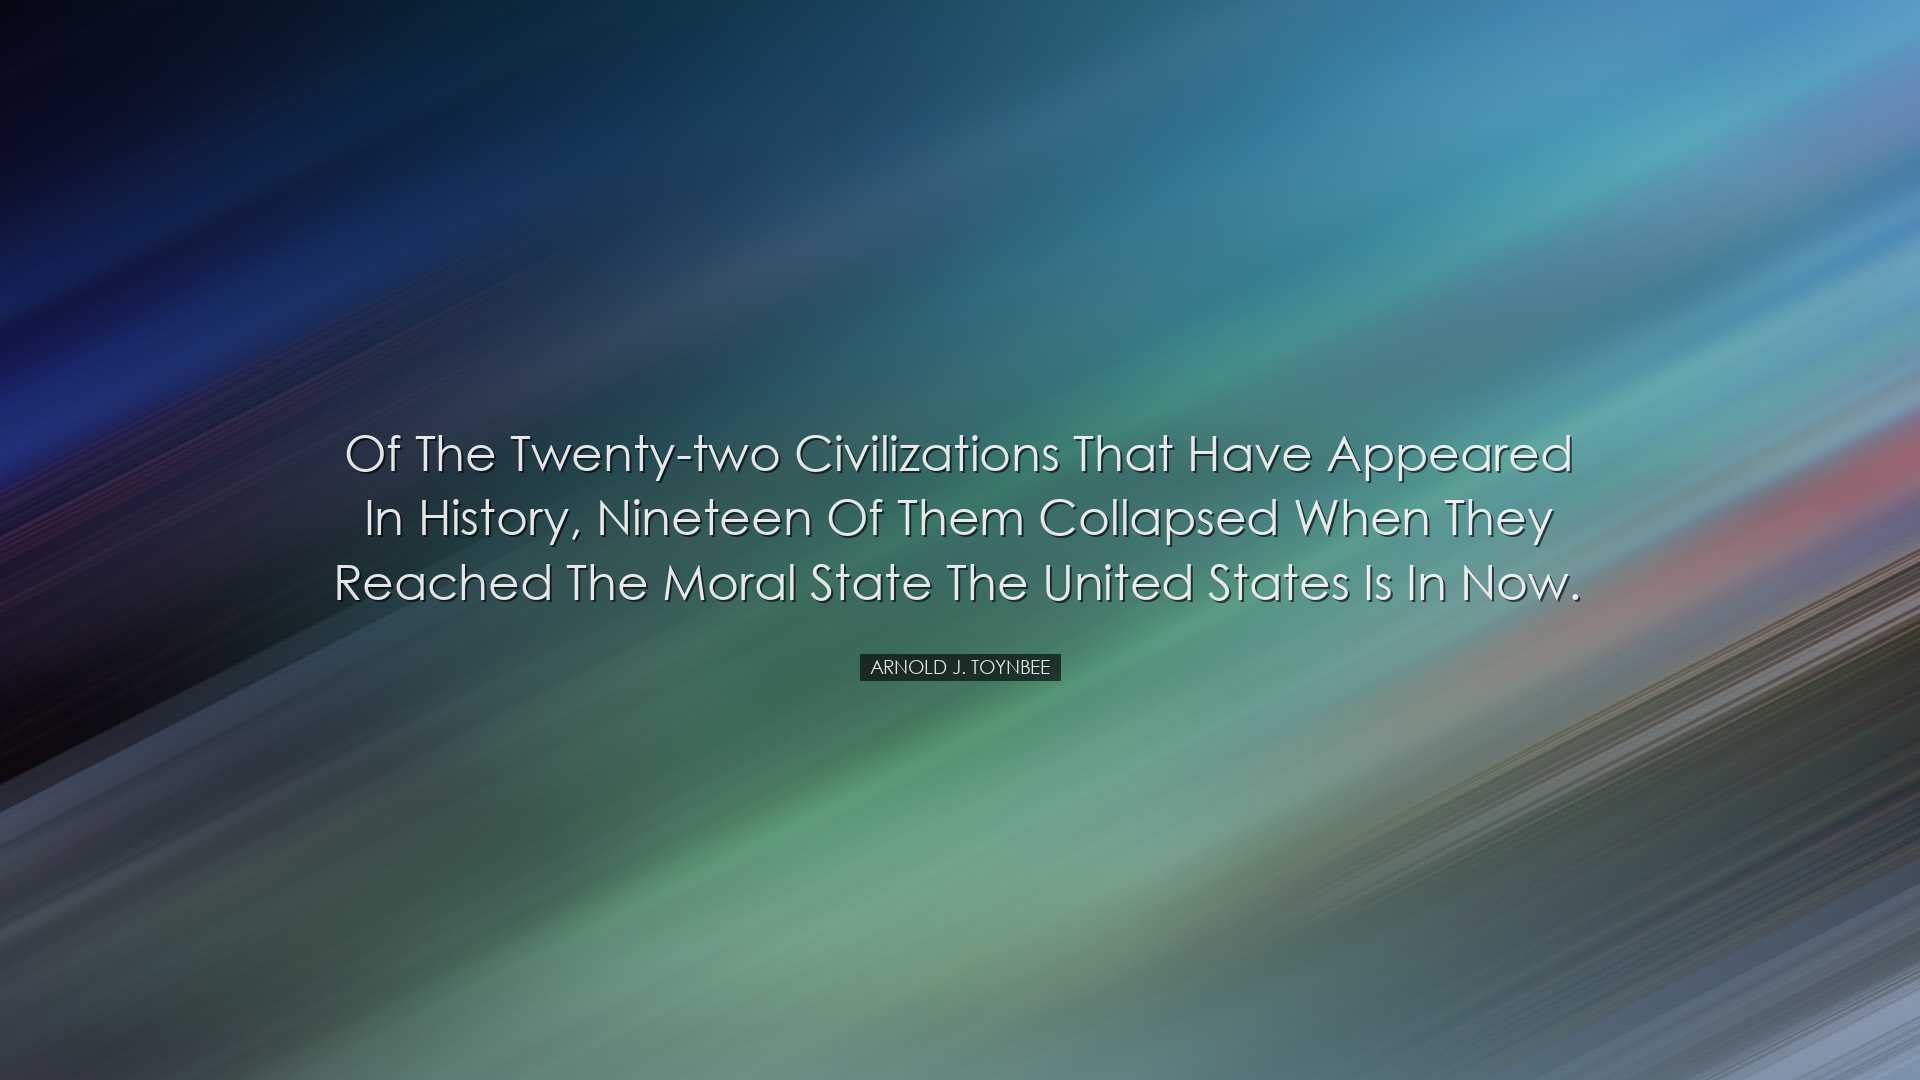 Of the twenty-two civilizations that have appeared in history, nin